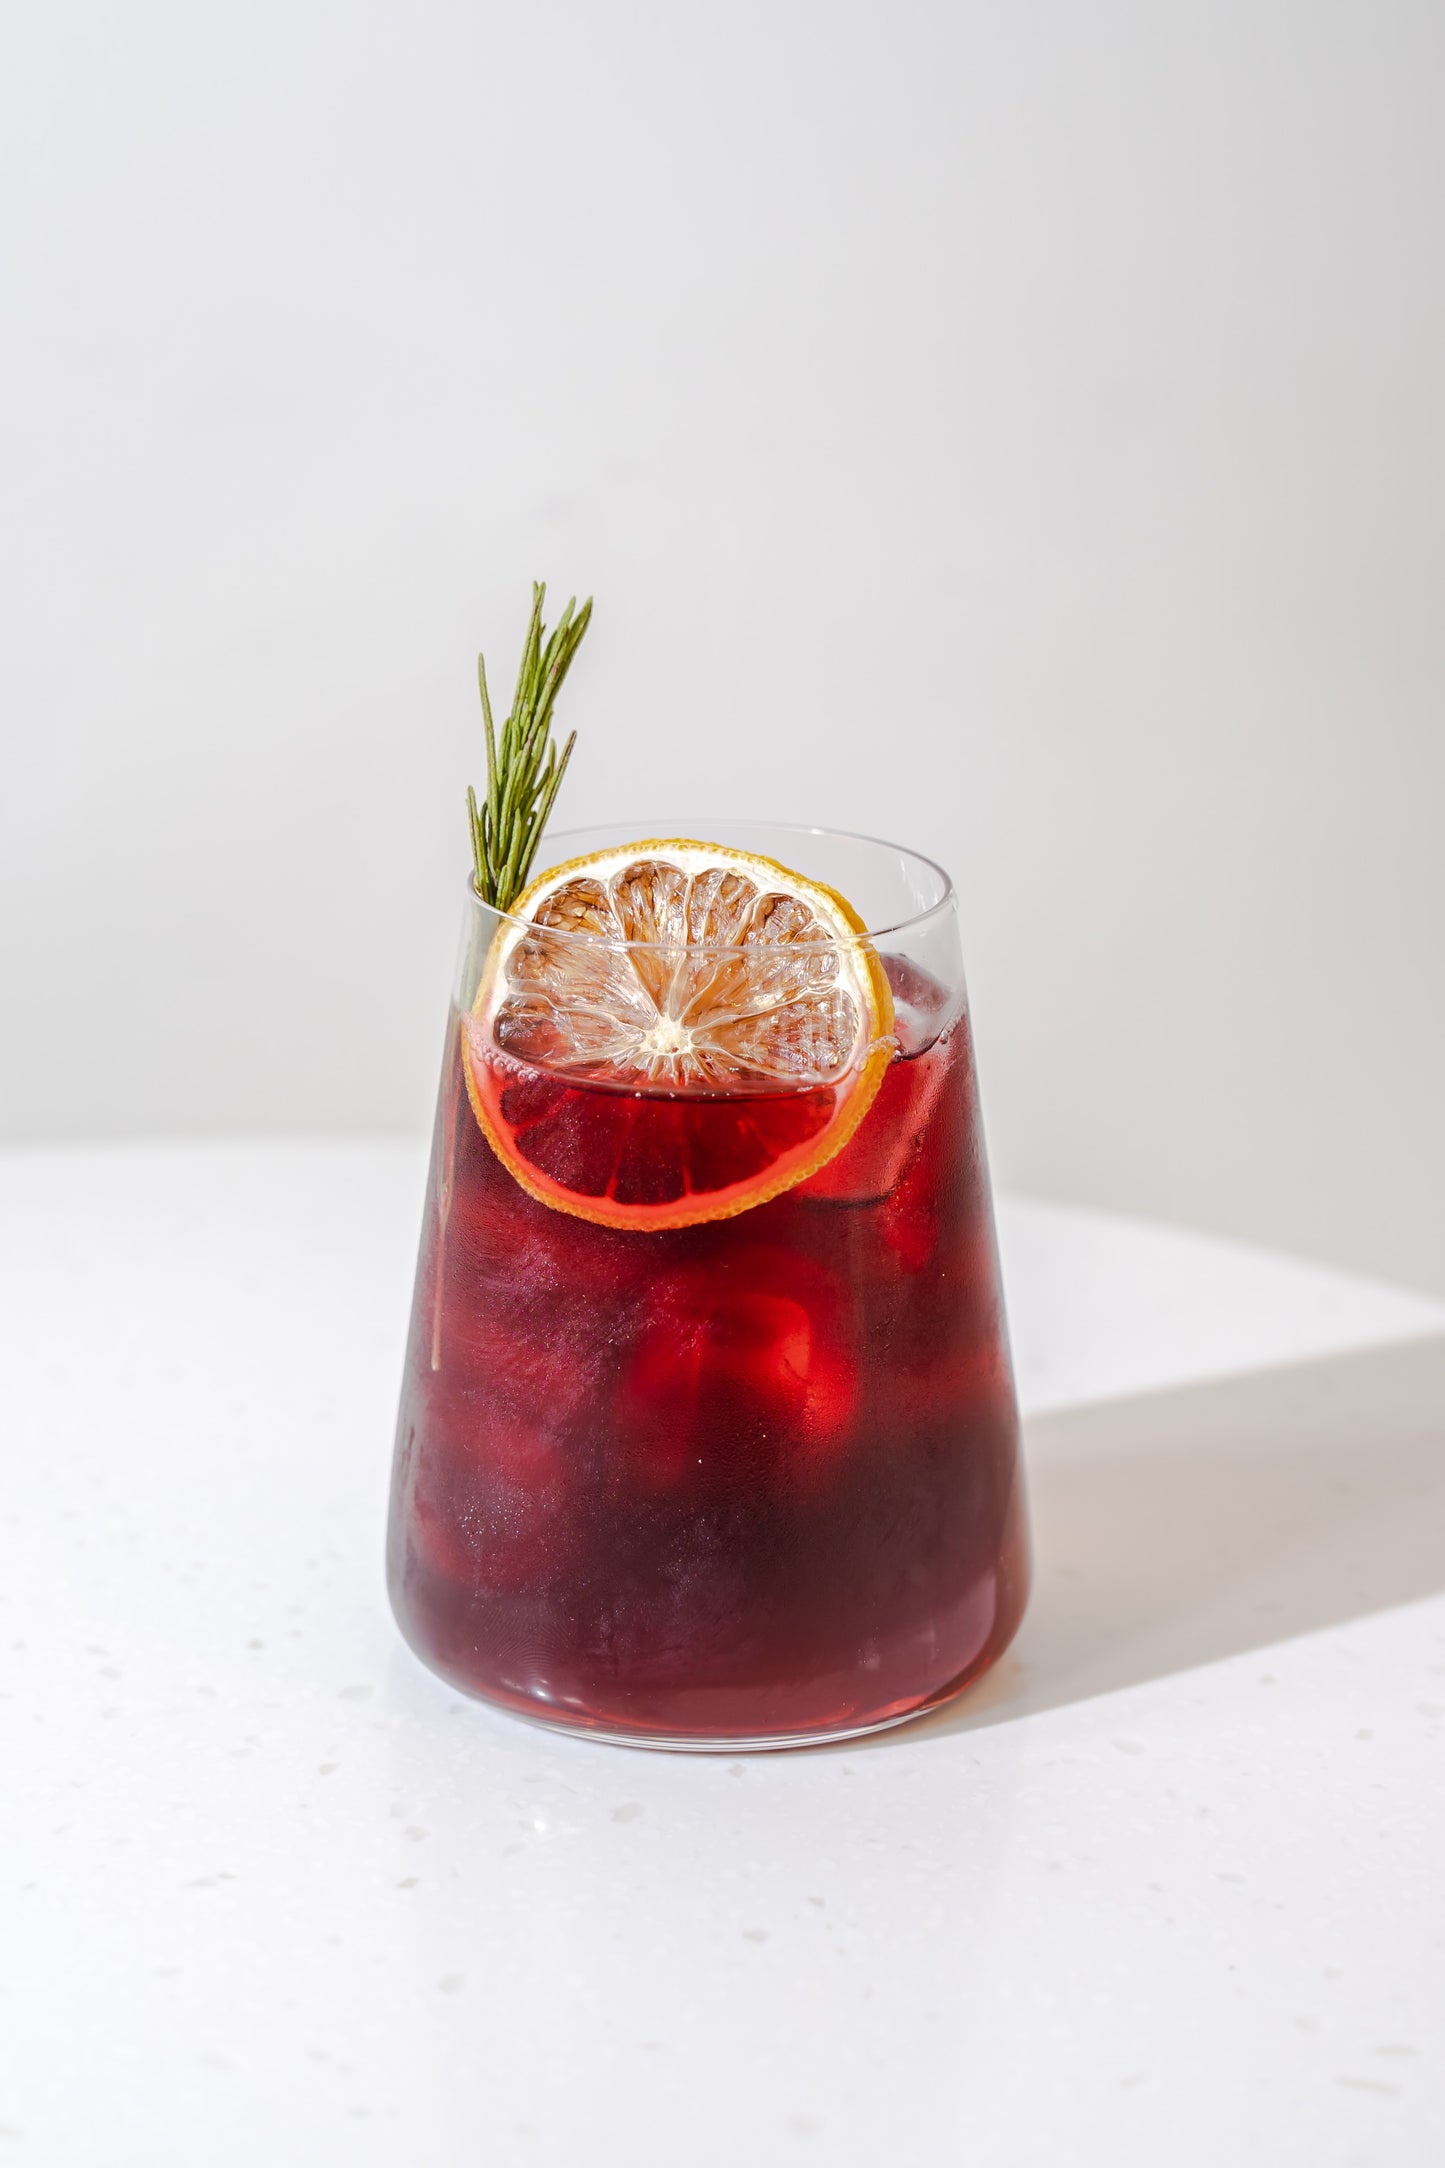 a transperant glass of an icy mocktail made with Adri Wellness' Hibiscus powder garnished with a piece of lemon